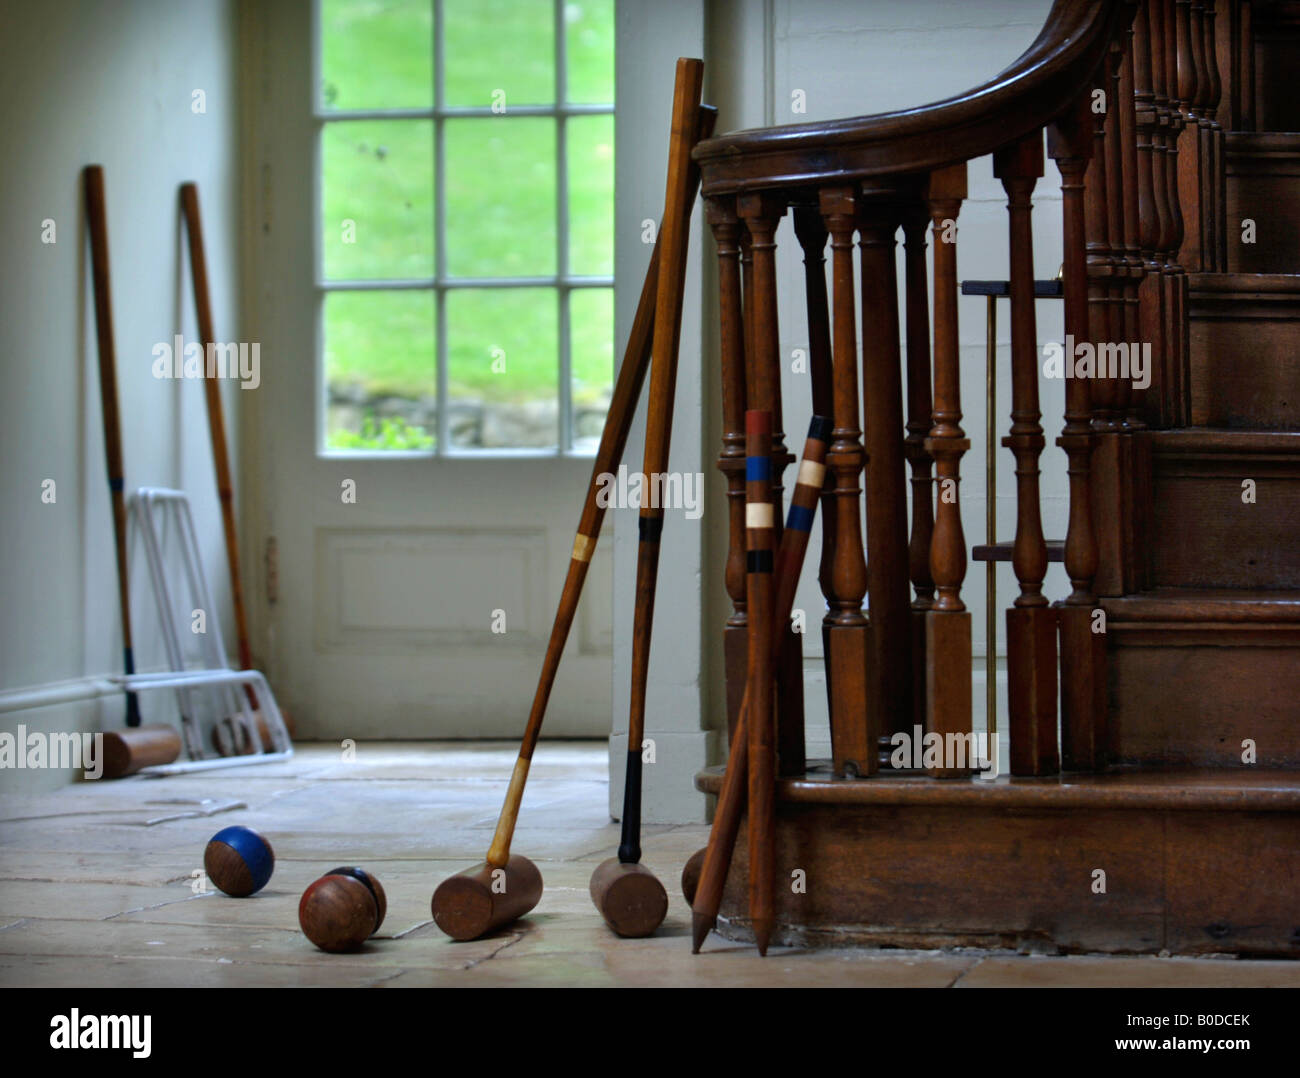 CROQUET MALLETS BALLS AND HOOPS BY THE BACK DOOR OF A COUNTRY HOUSE UK Stock Photo